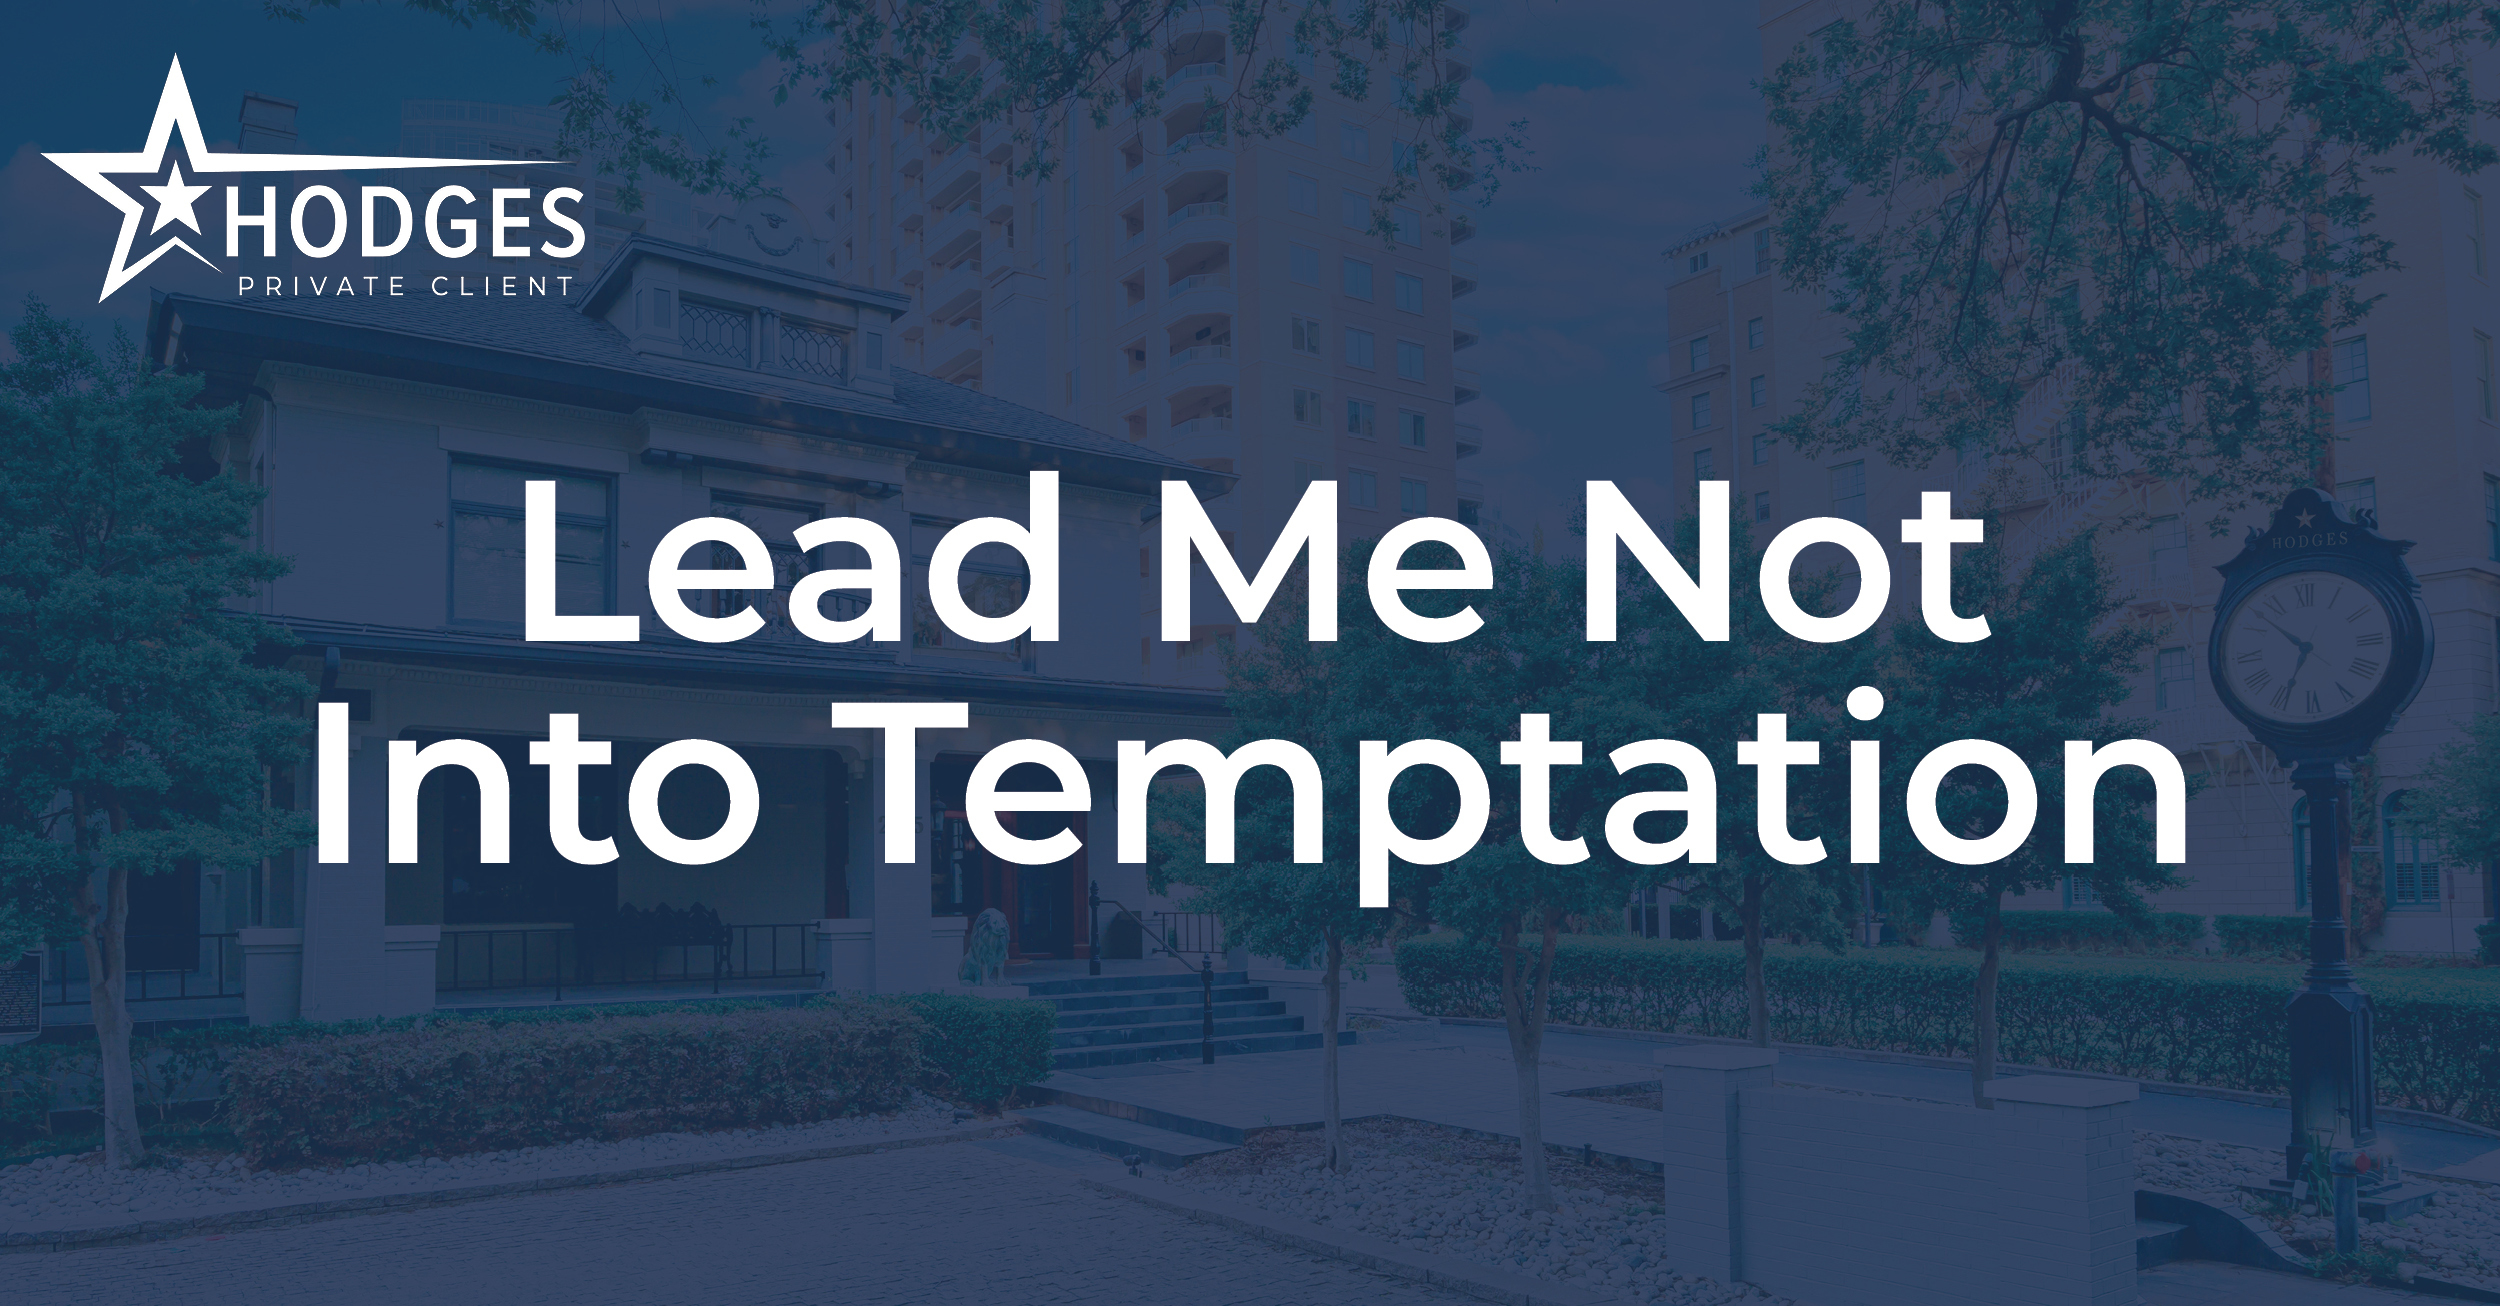 Lead Me Not into Temptation - Chasing Highflyers and the FOMO Factor